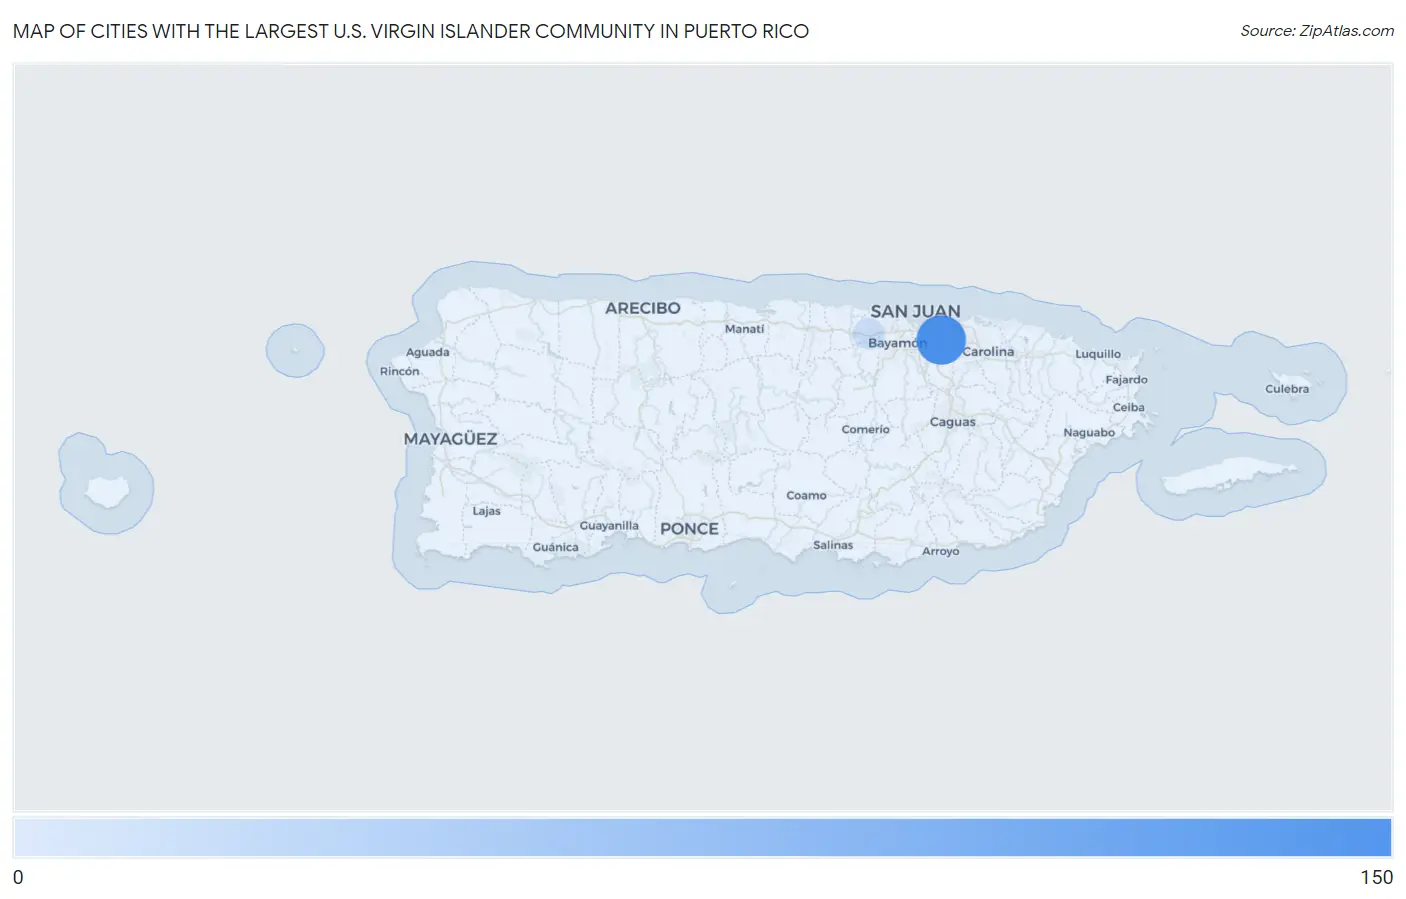 Cities with the Largest U.S. Virgin Islander Community in Puerto Rico Map